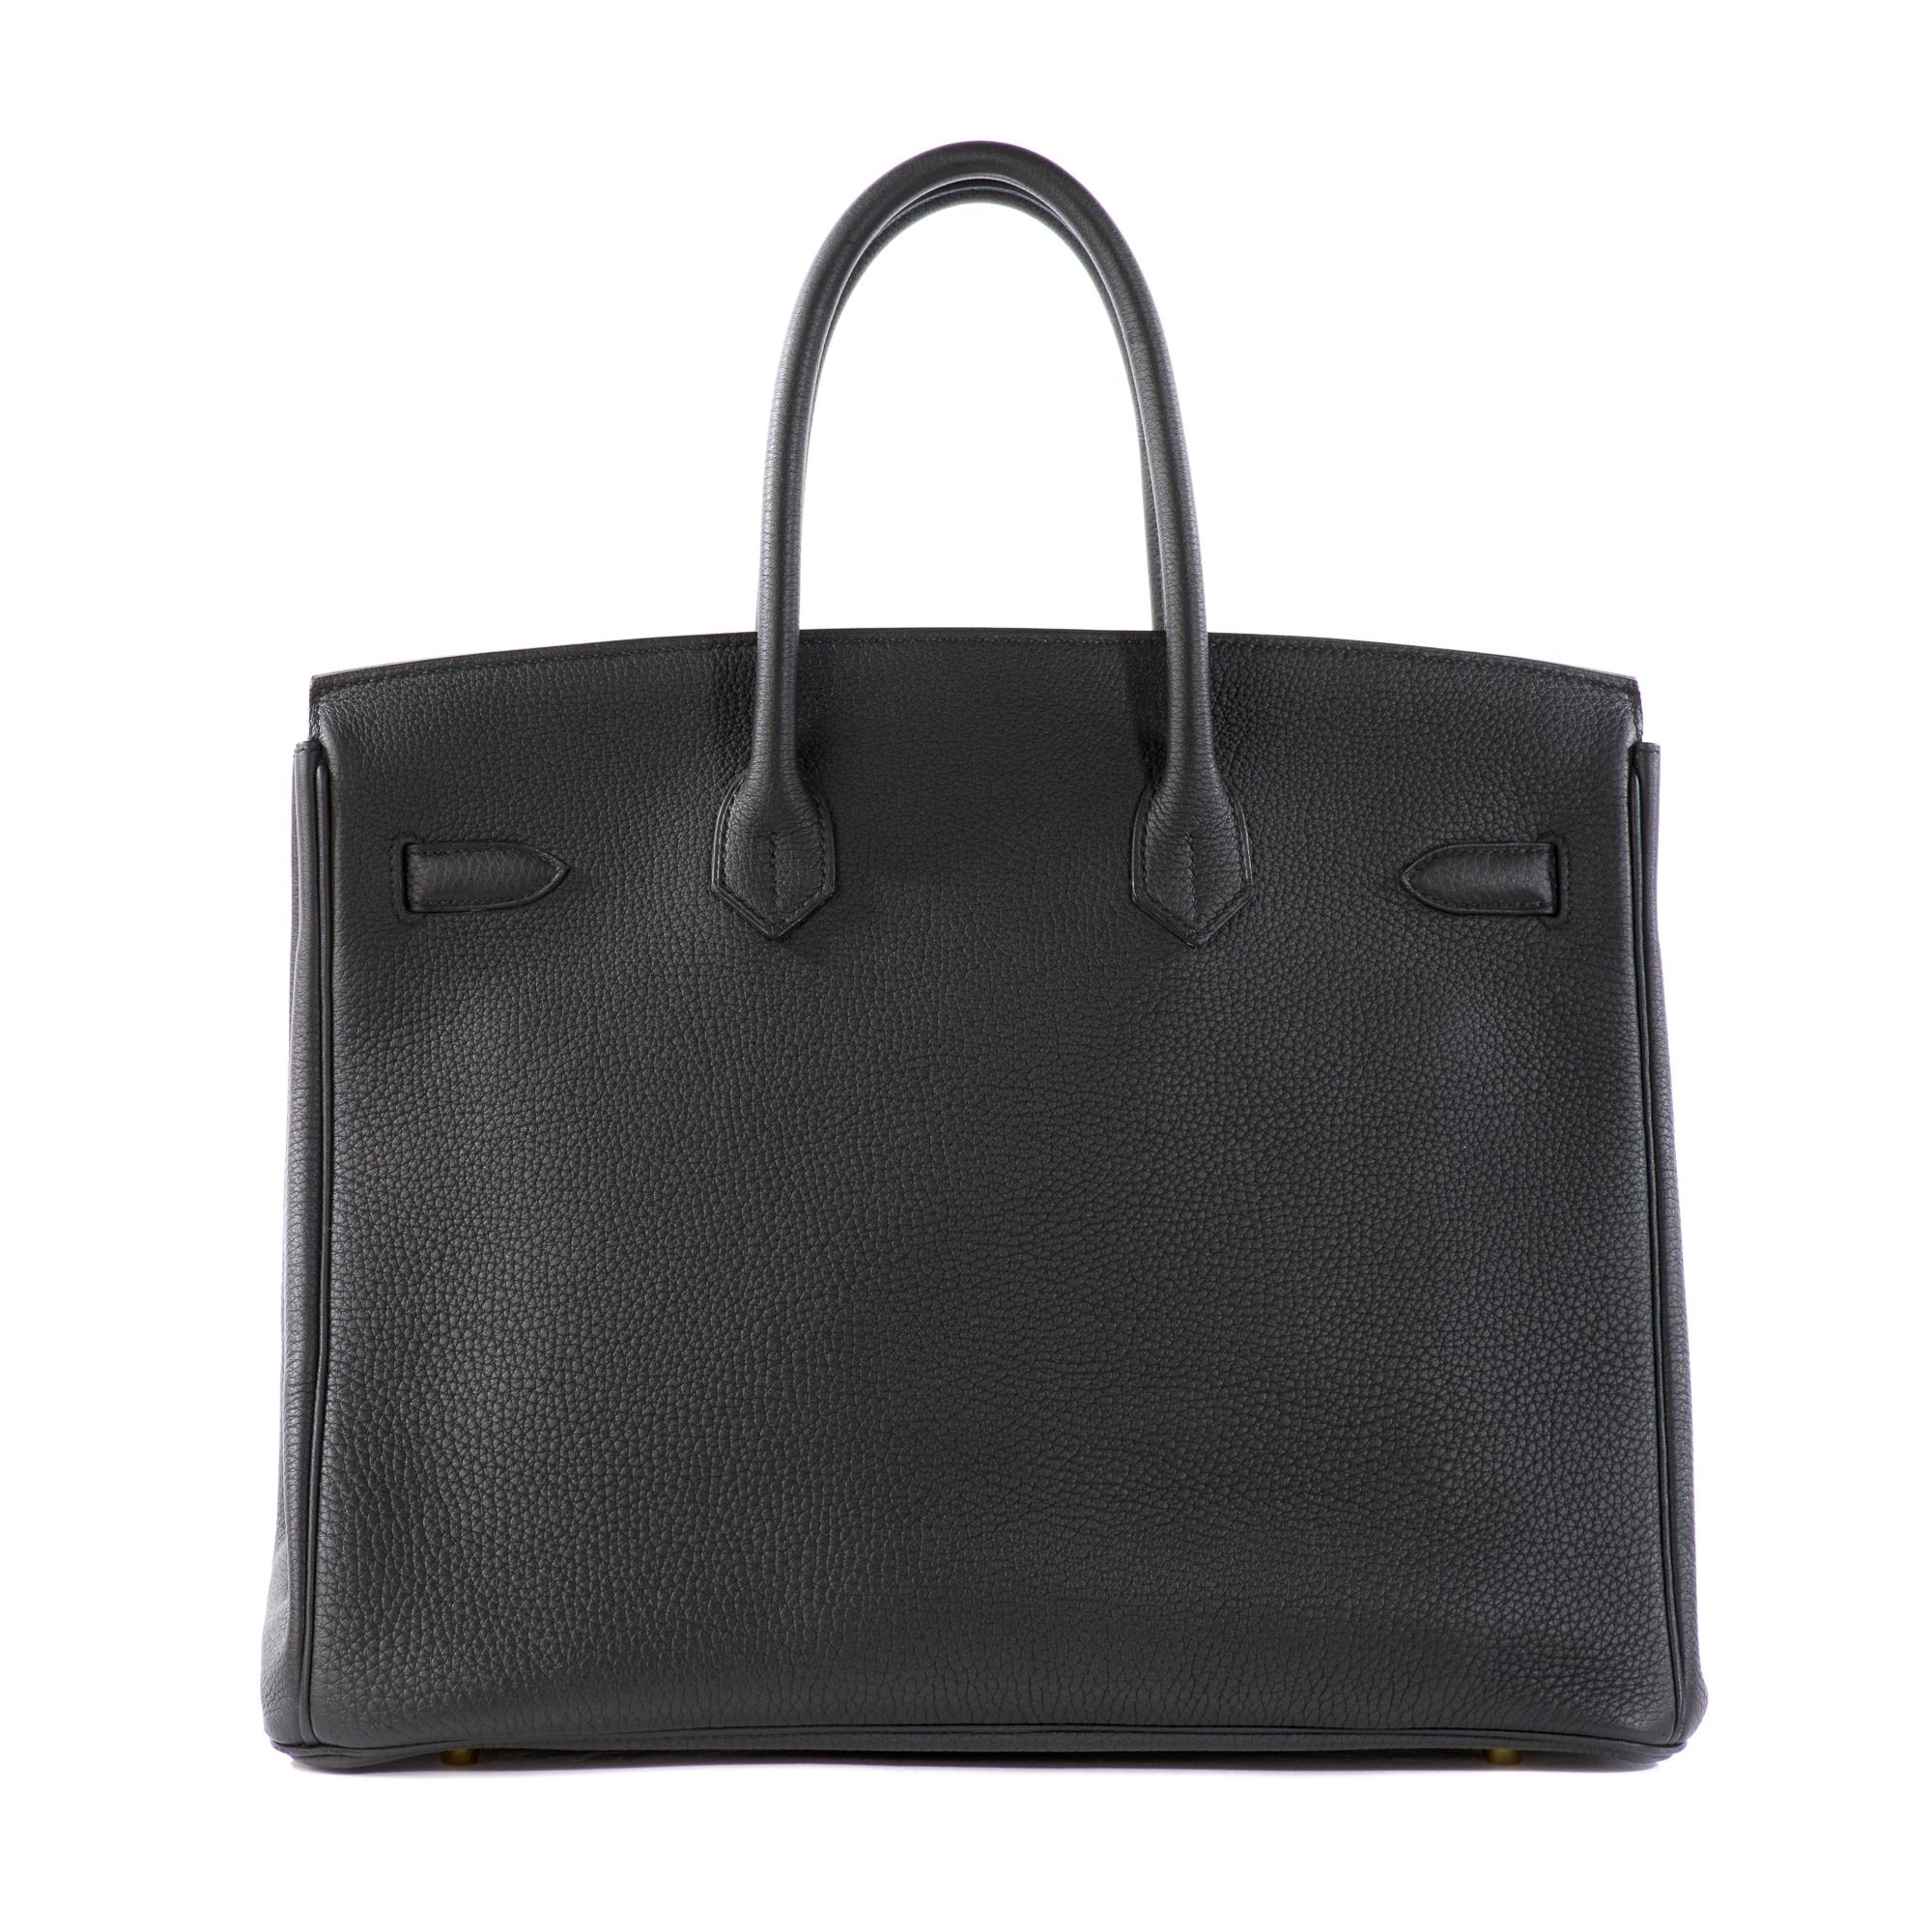 Black Togo leather Hermès Birkin 35 with gold-plated hardware, stamp T (2015) rolled top handles, protective feet at base, tonal leather lining, dual pockets at interior walls; one with zip closure and turn-lock closure at front flap. 
Packaging :